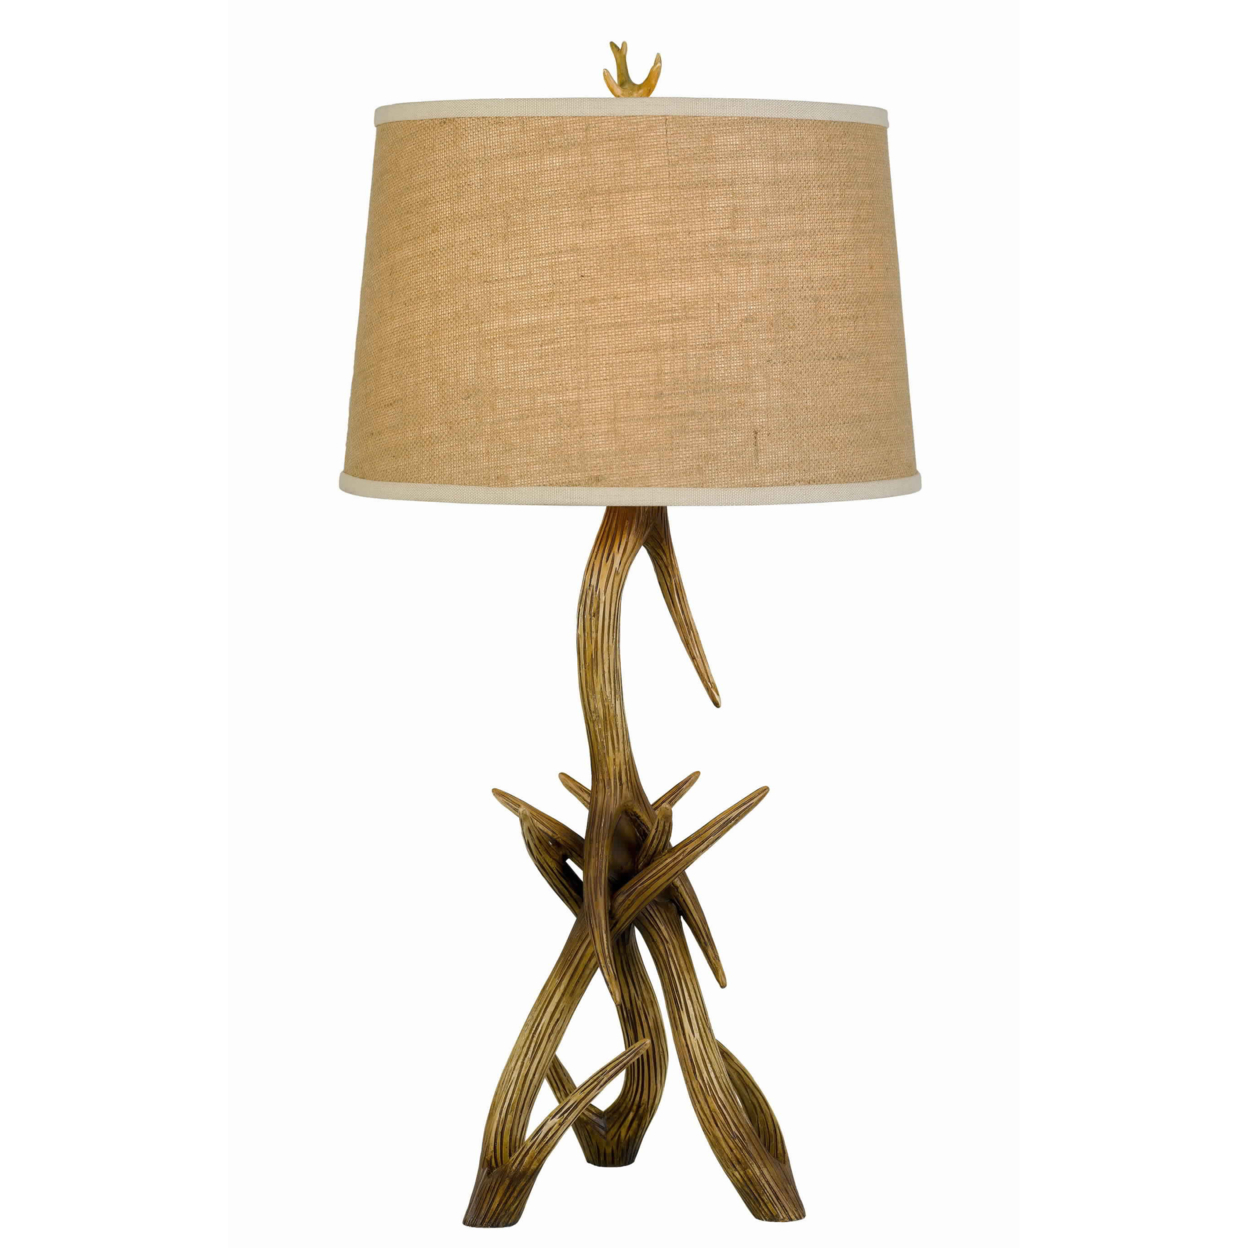 Textured Fabric Shade Table Lamp With Antler Design Base, Beige And Brown- Saltoro Sherpi